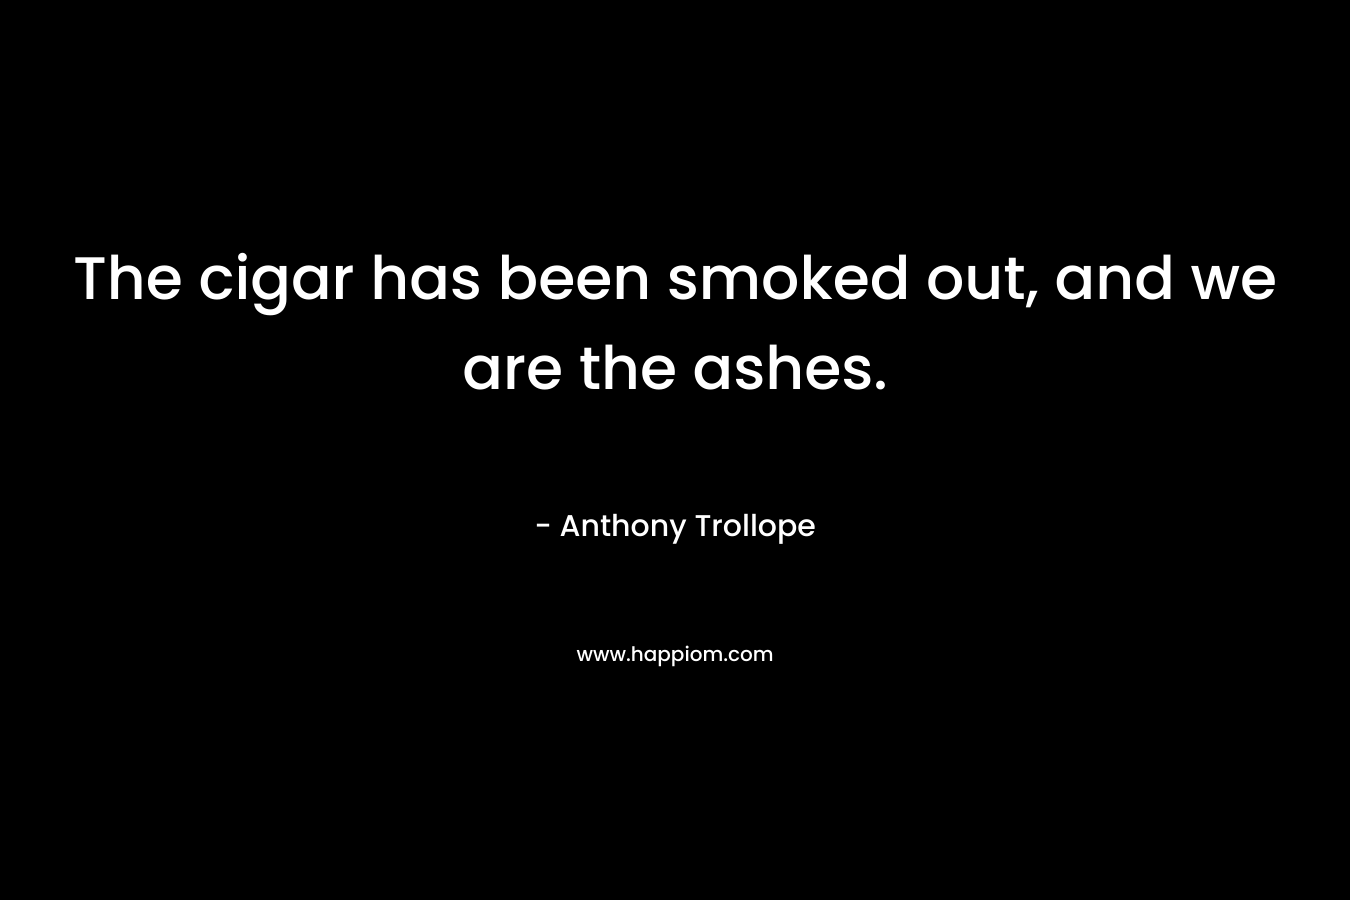 The cigar has been smoked out, and we are the ashes.